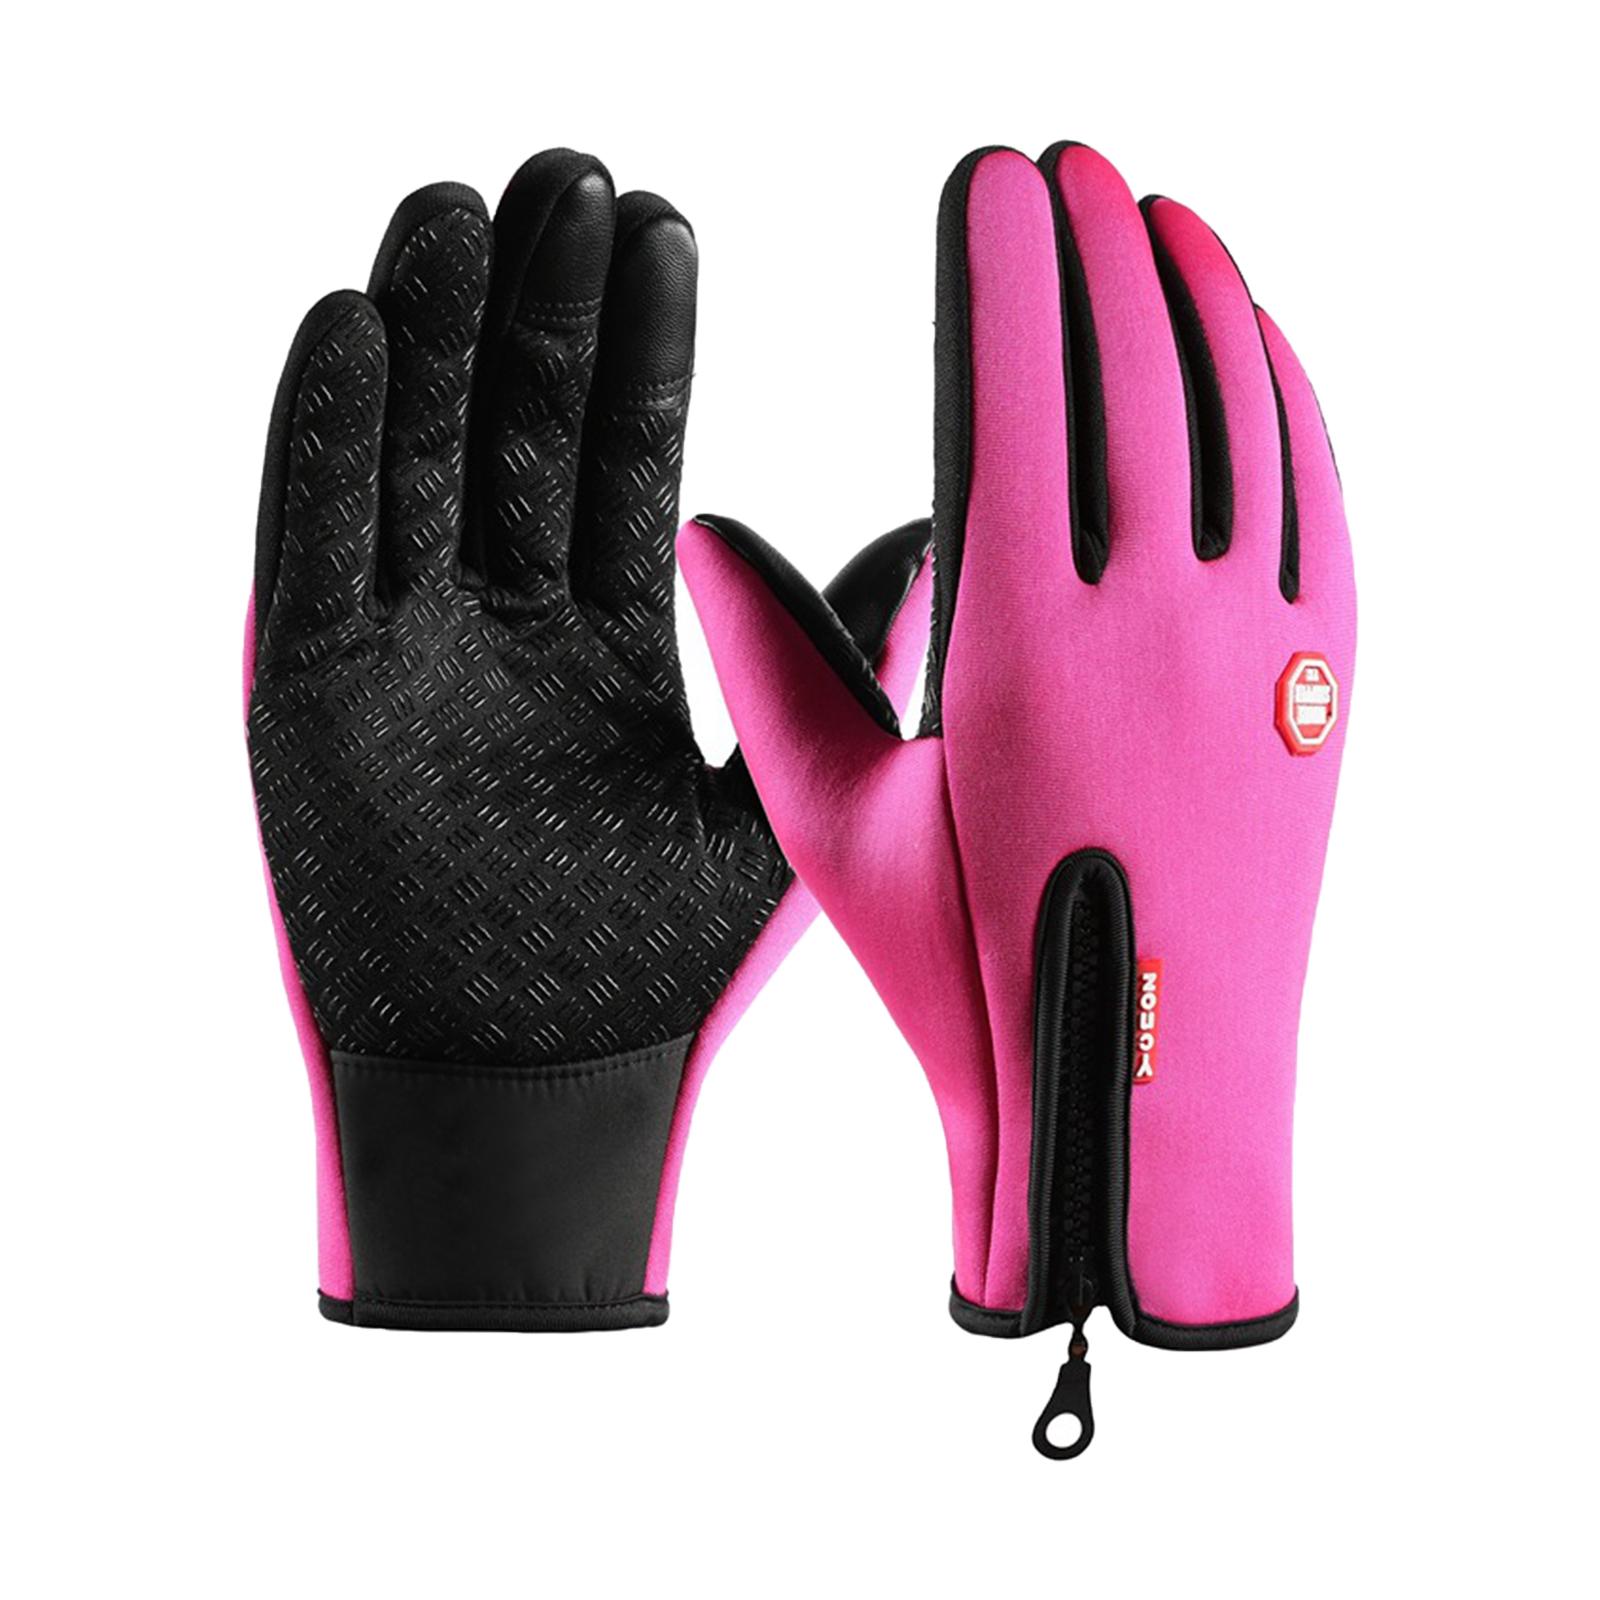 Winter Gloves Windproof Insulated for Motorcycle Cycling Adults Unisex L Pink